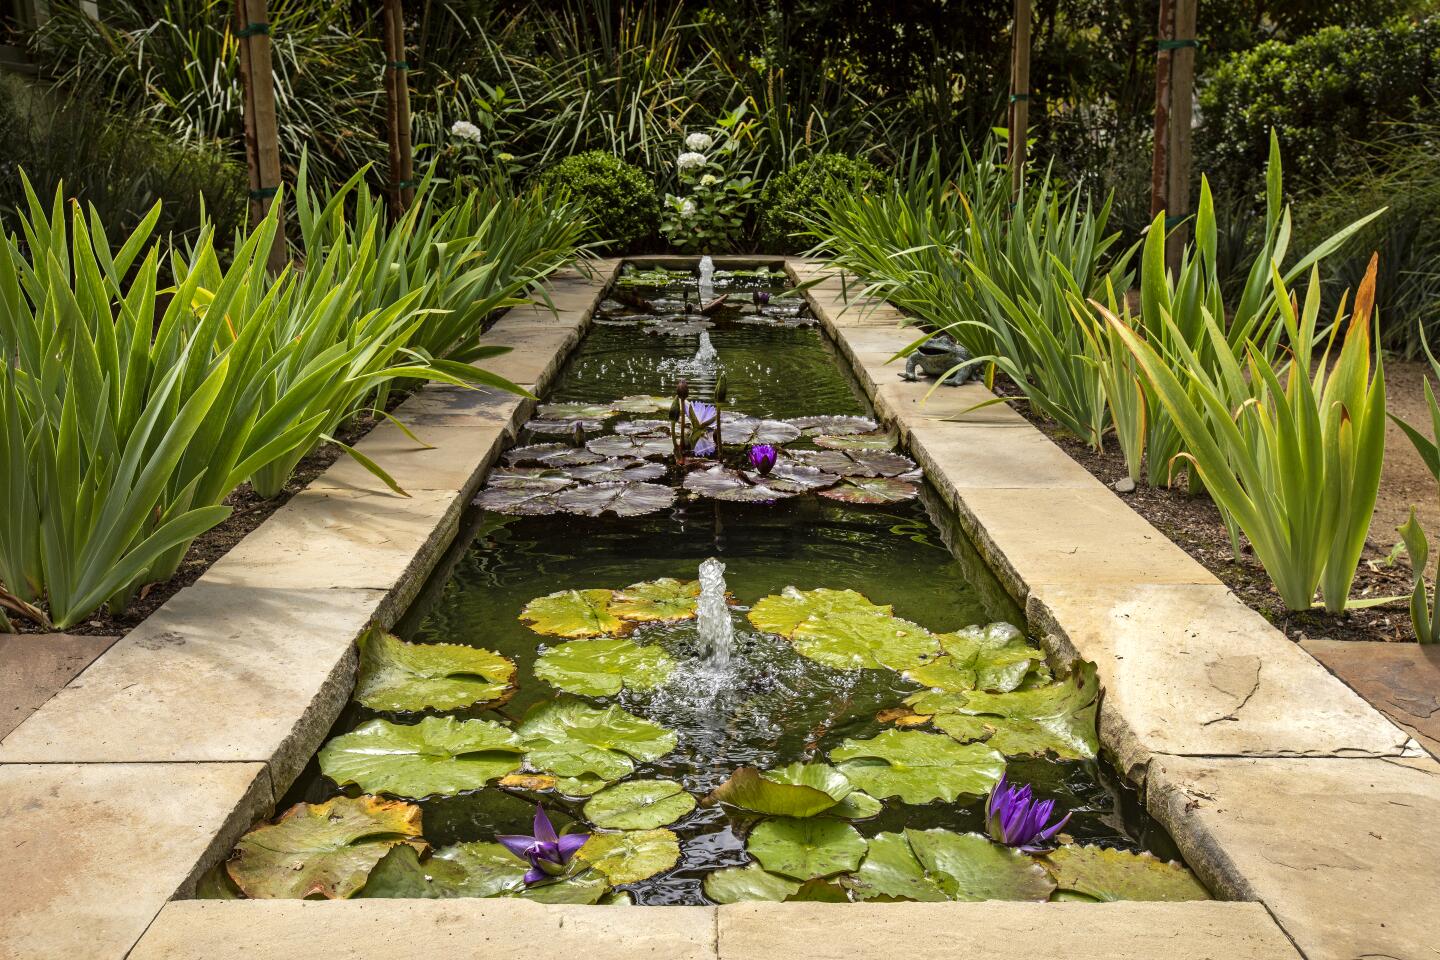 A pond filled with water lilies greets visitors to the Santa Monica home, signaling the quiet retreat to be found in the backyard.